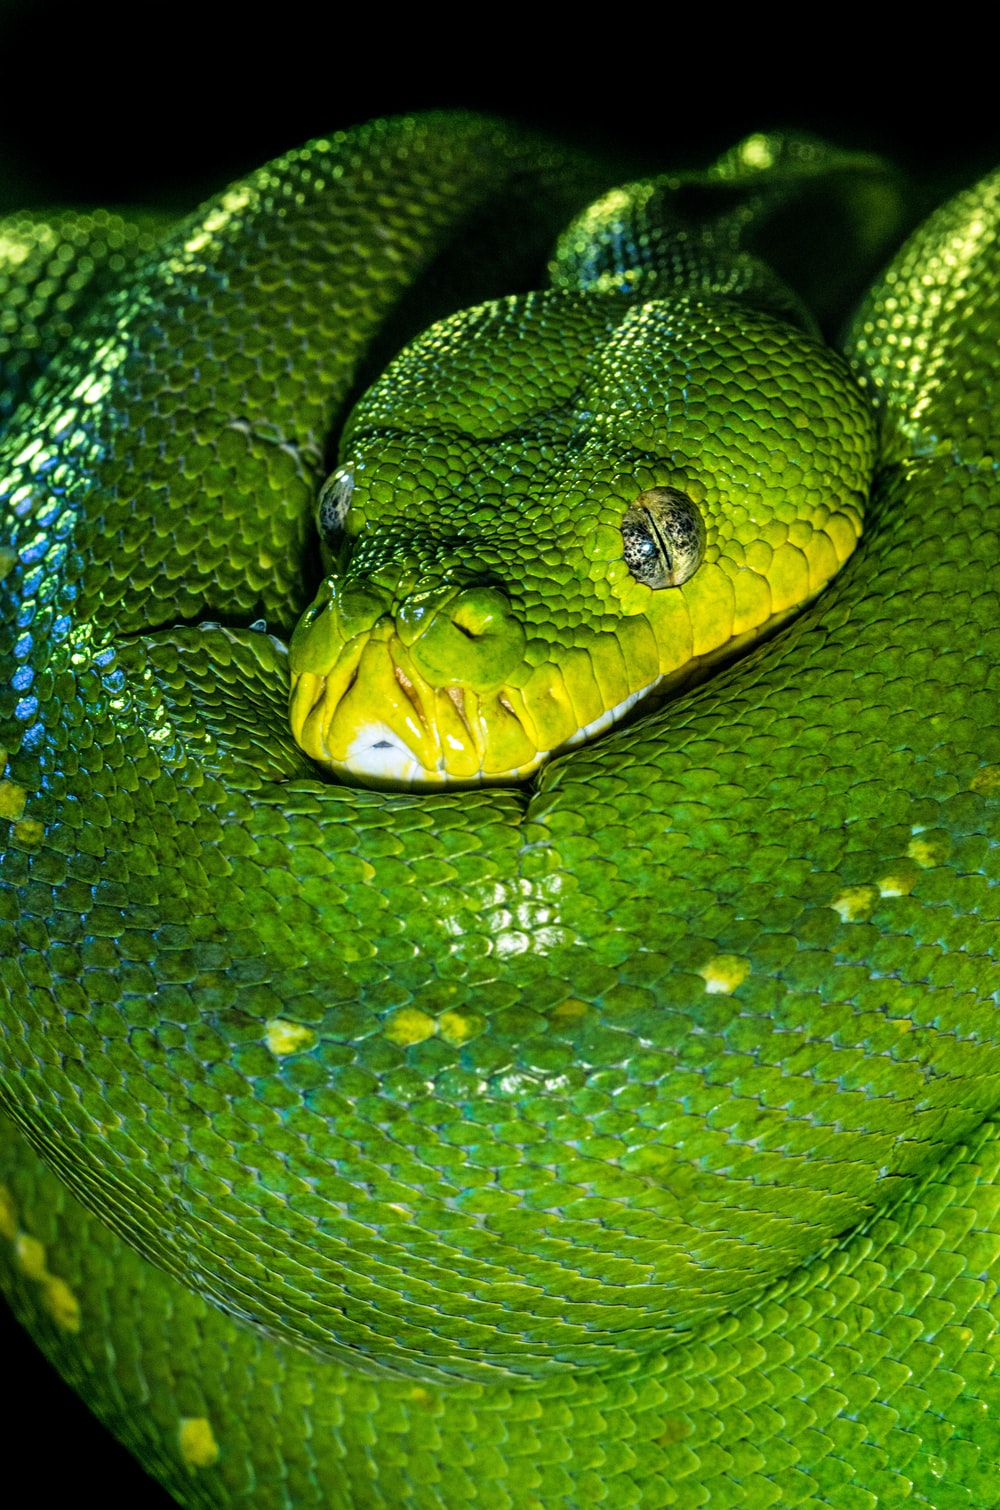 Green Tree Python Picture. Download Free Image